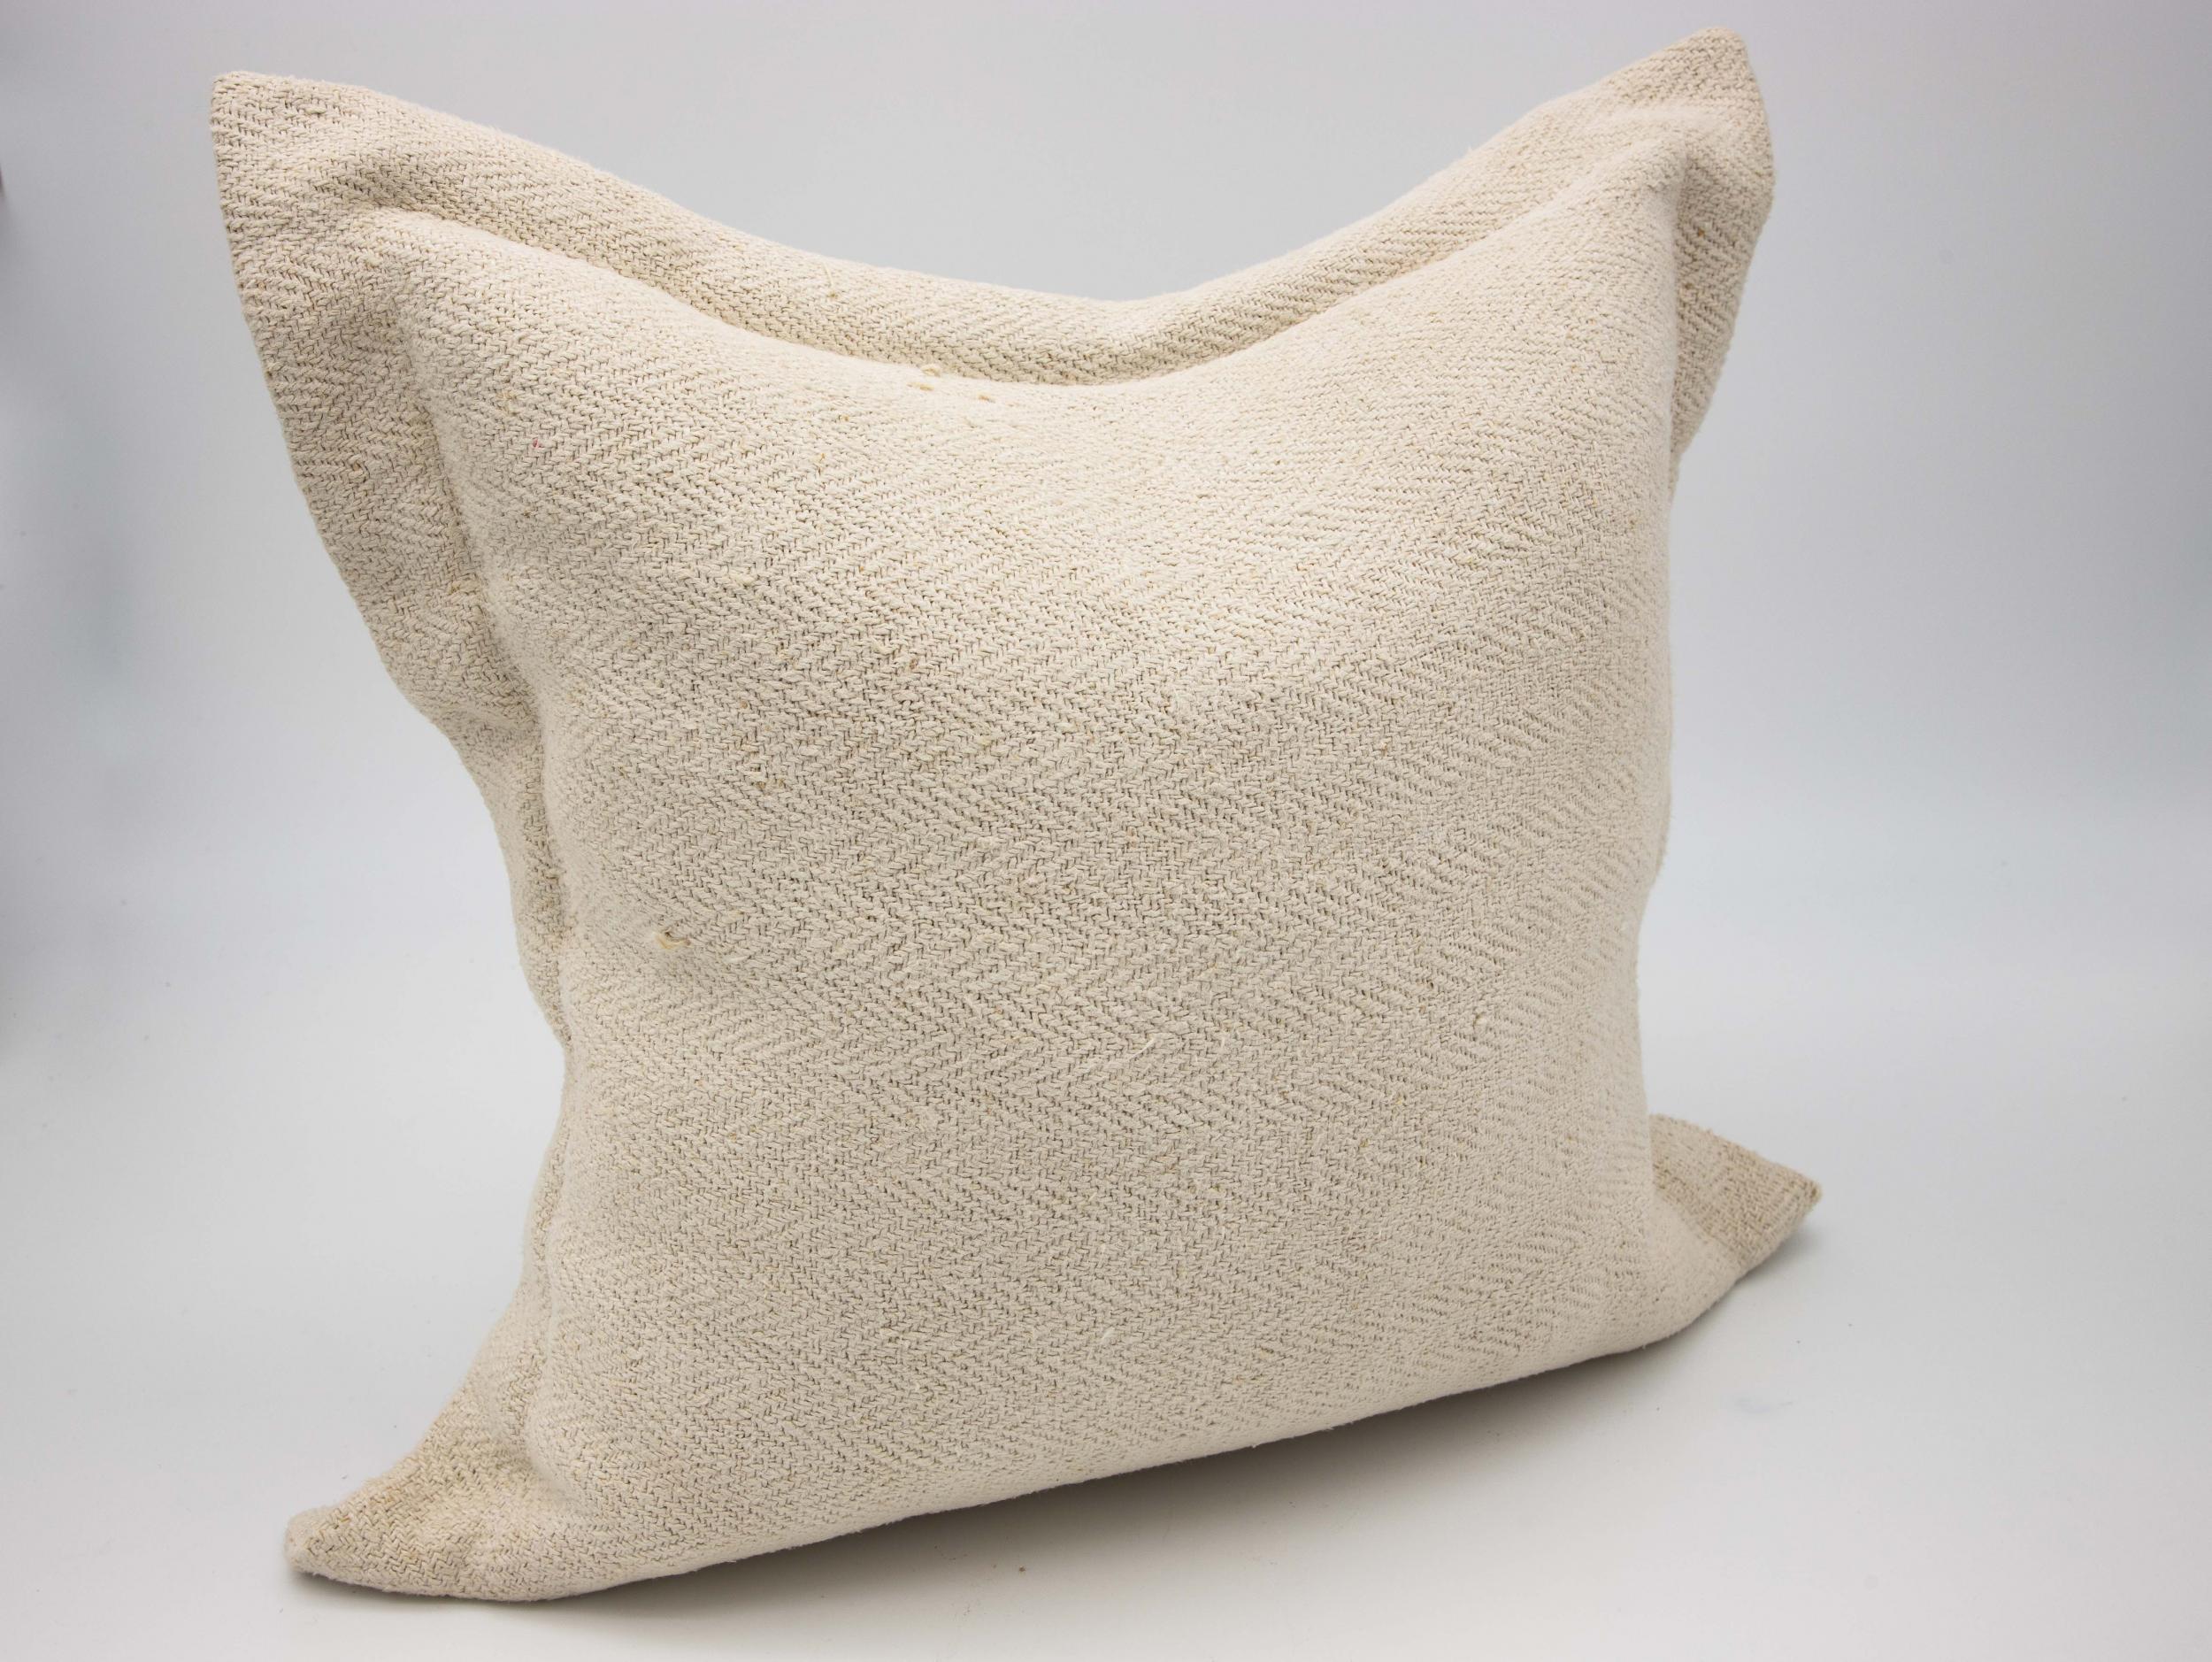 A pair of 20 x 20 pillows made from antique Belgian linen. A large flange finish with down fill. Button closure on the reverse.